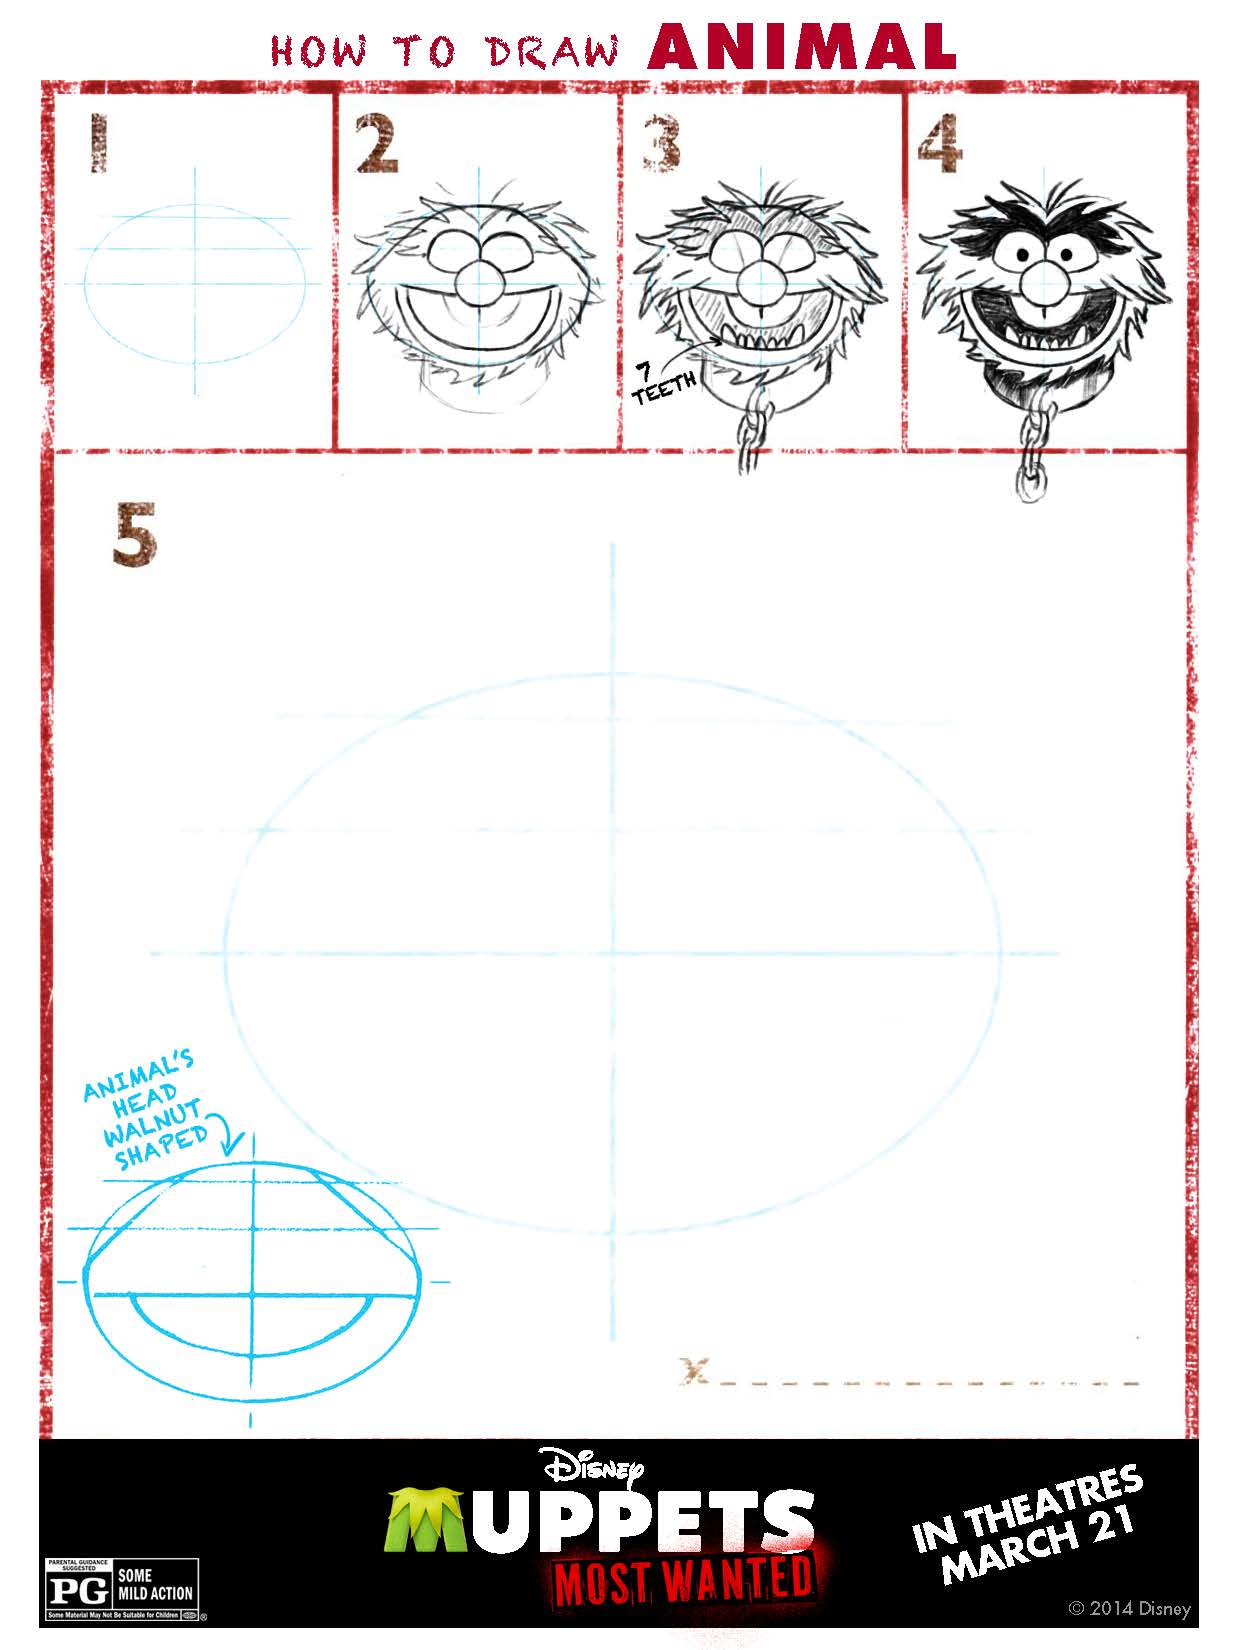 Step By Step How To Draw The Muppets Characters!